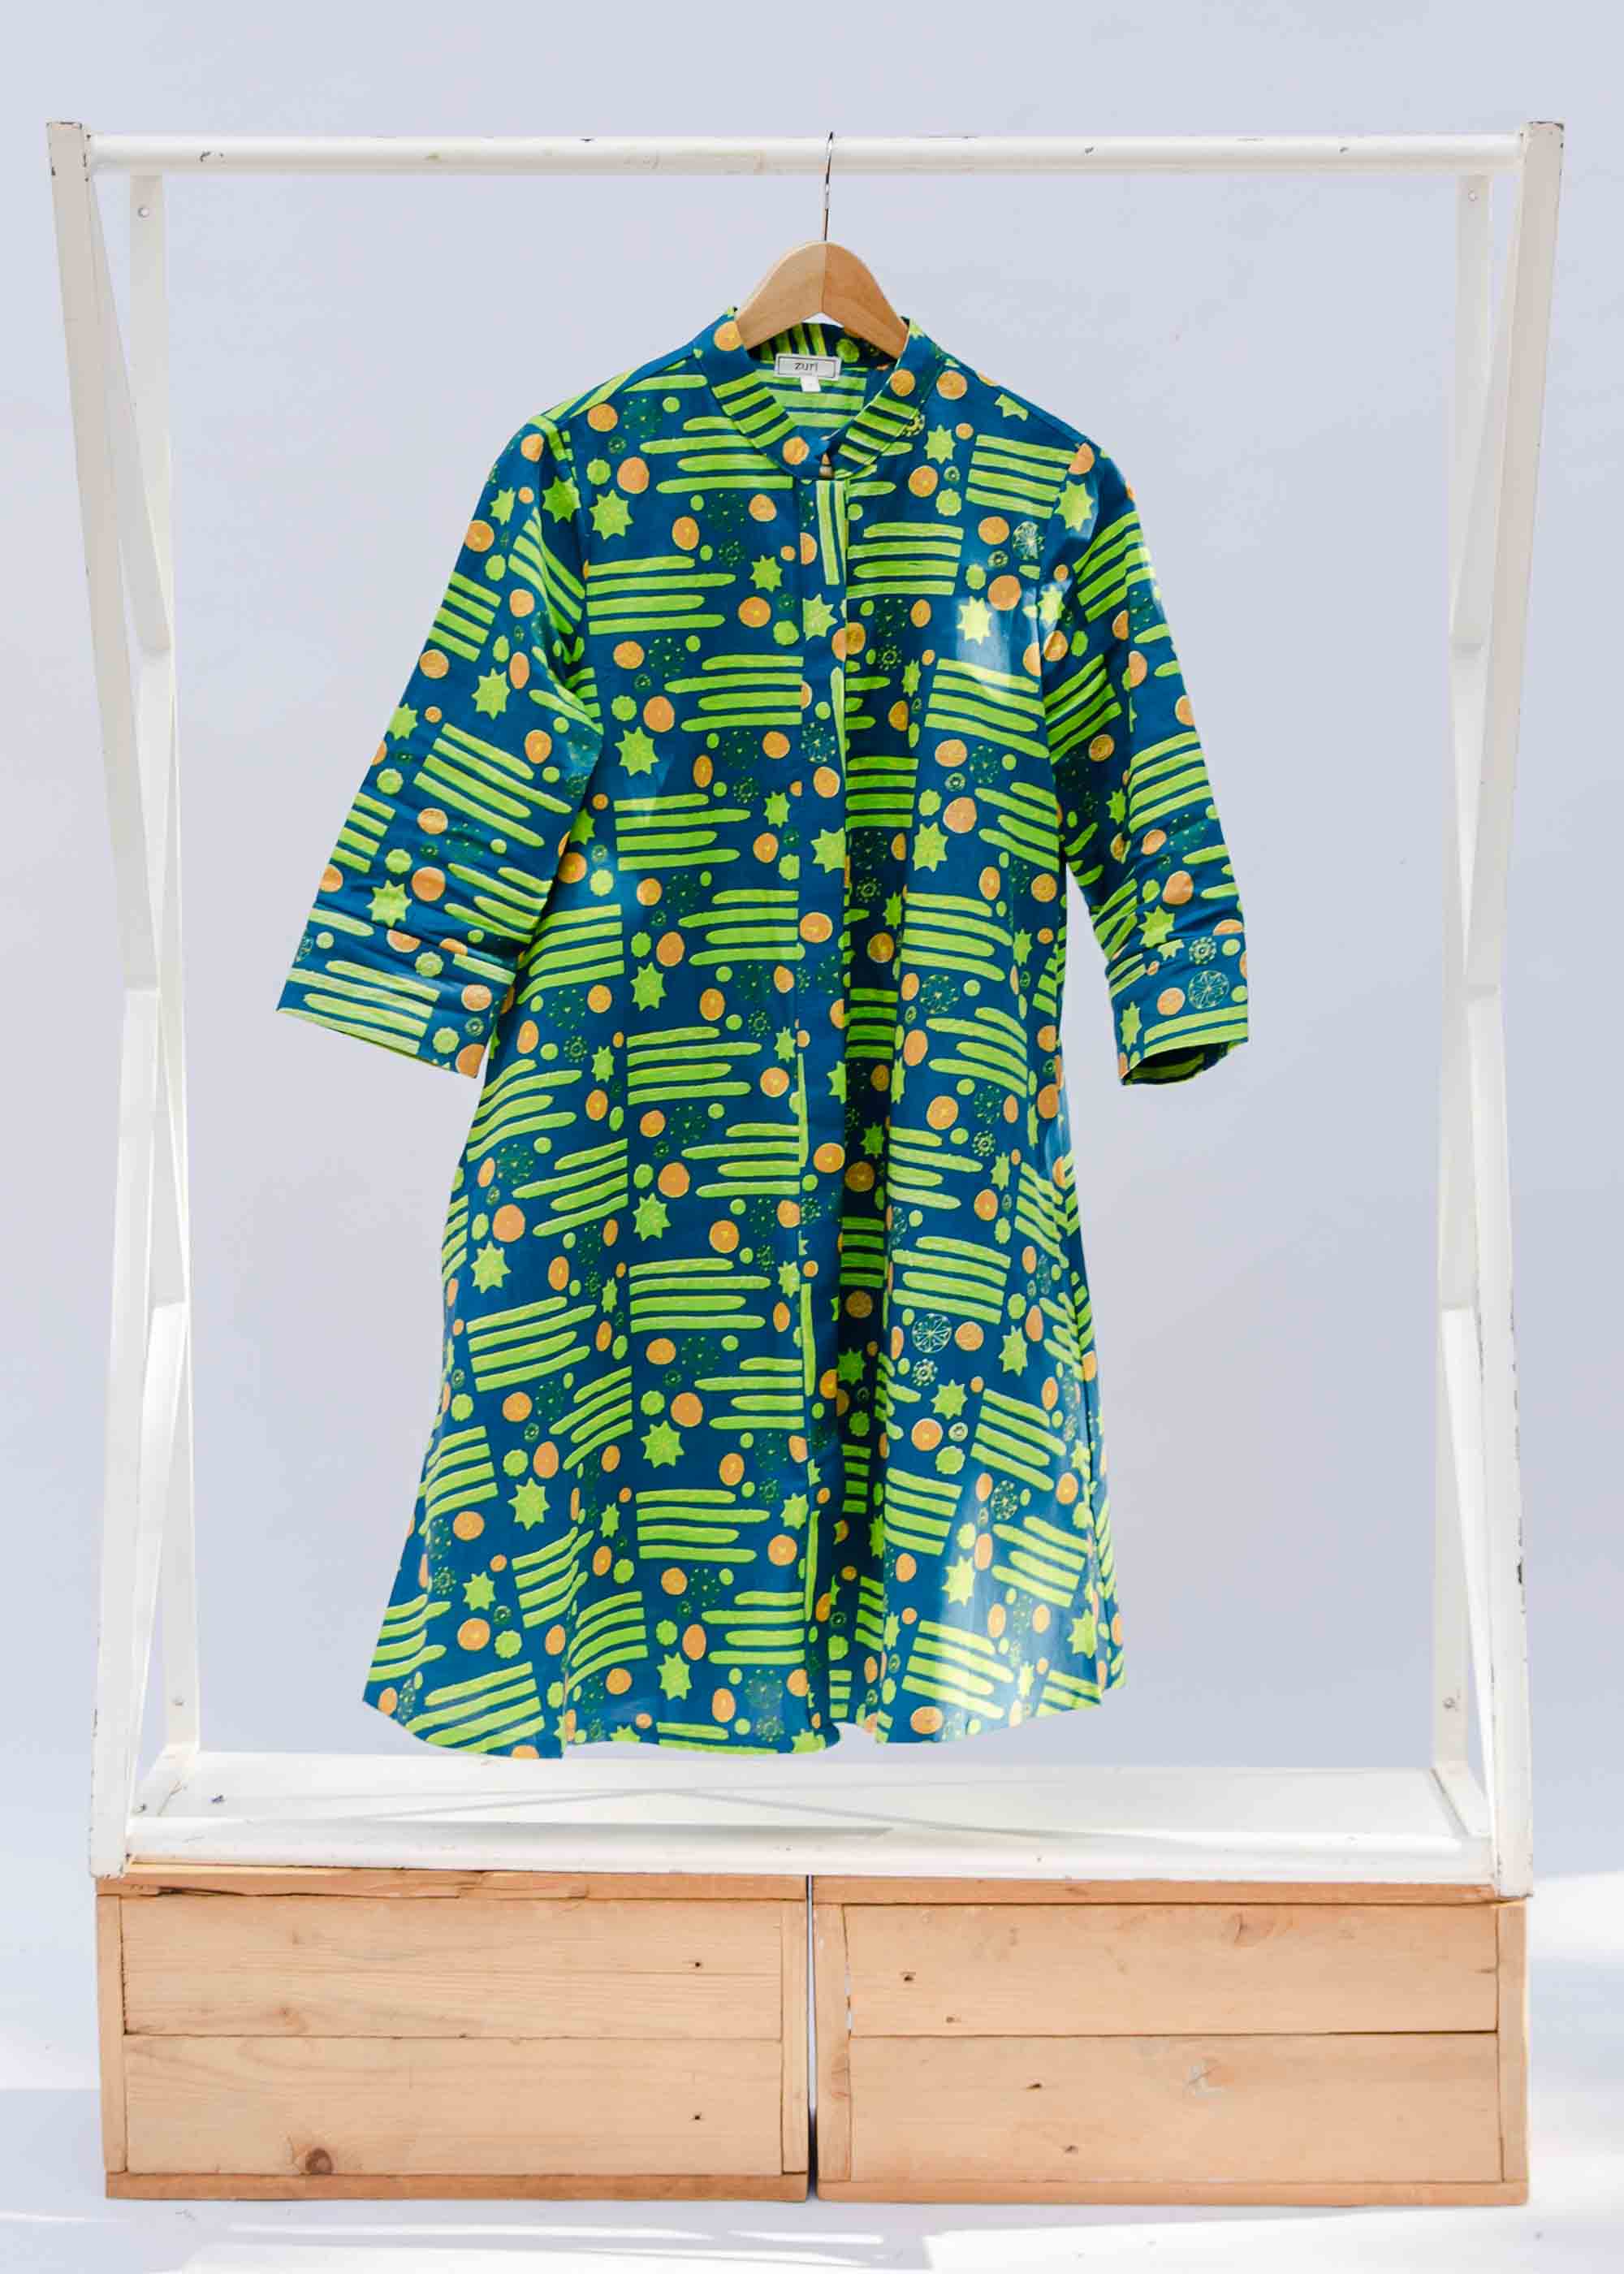 display of a blue and green cactus design dress